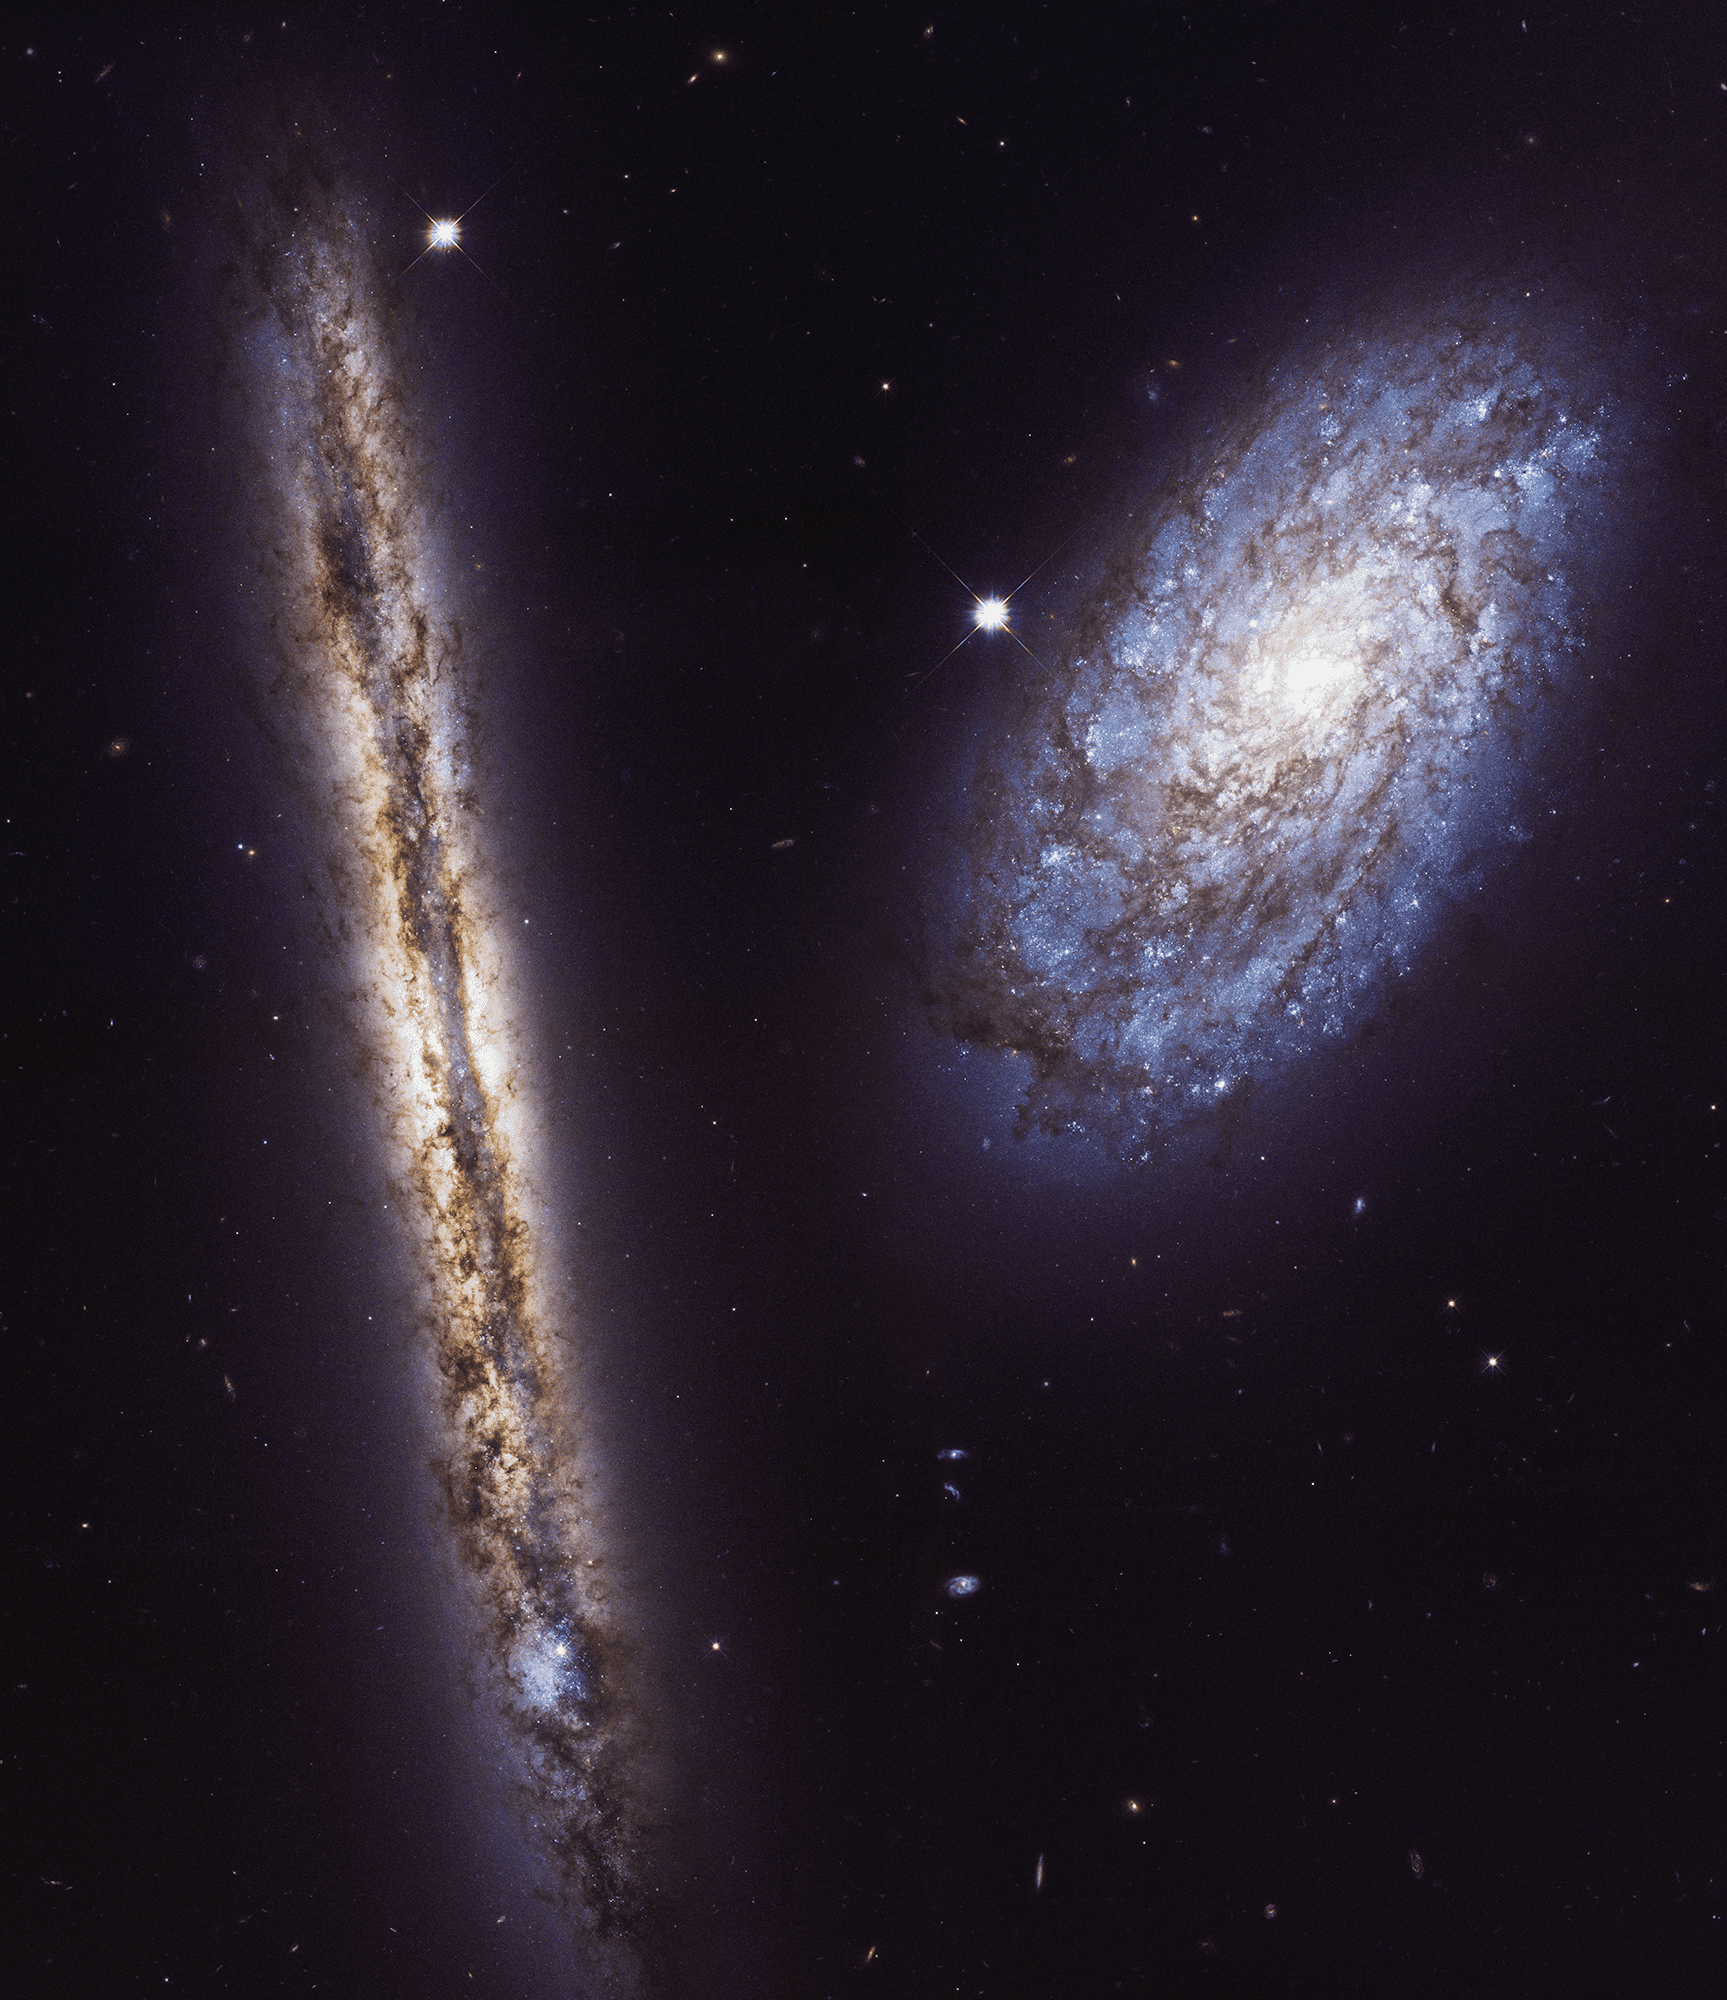 Spiral Galaxies: The Starry Snowflakes of the Cosmos